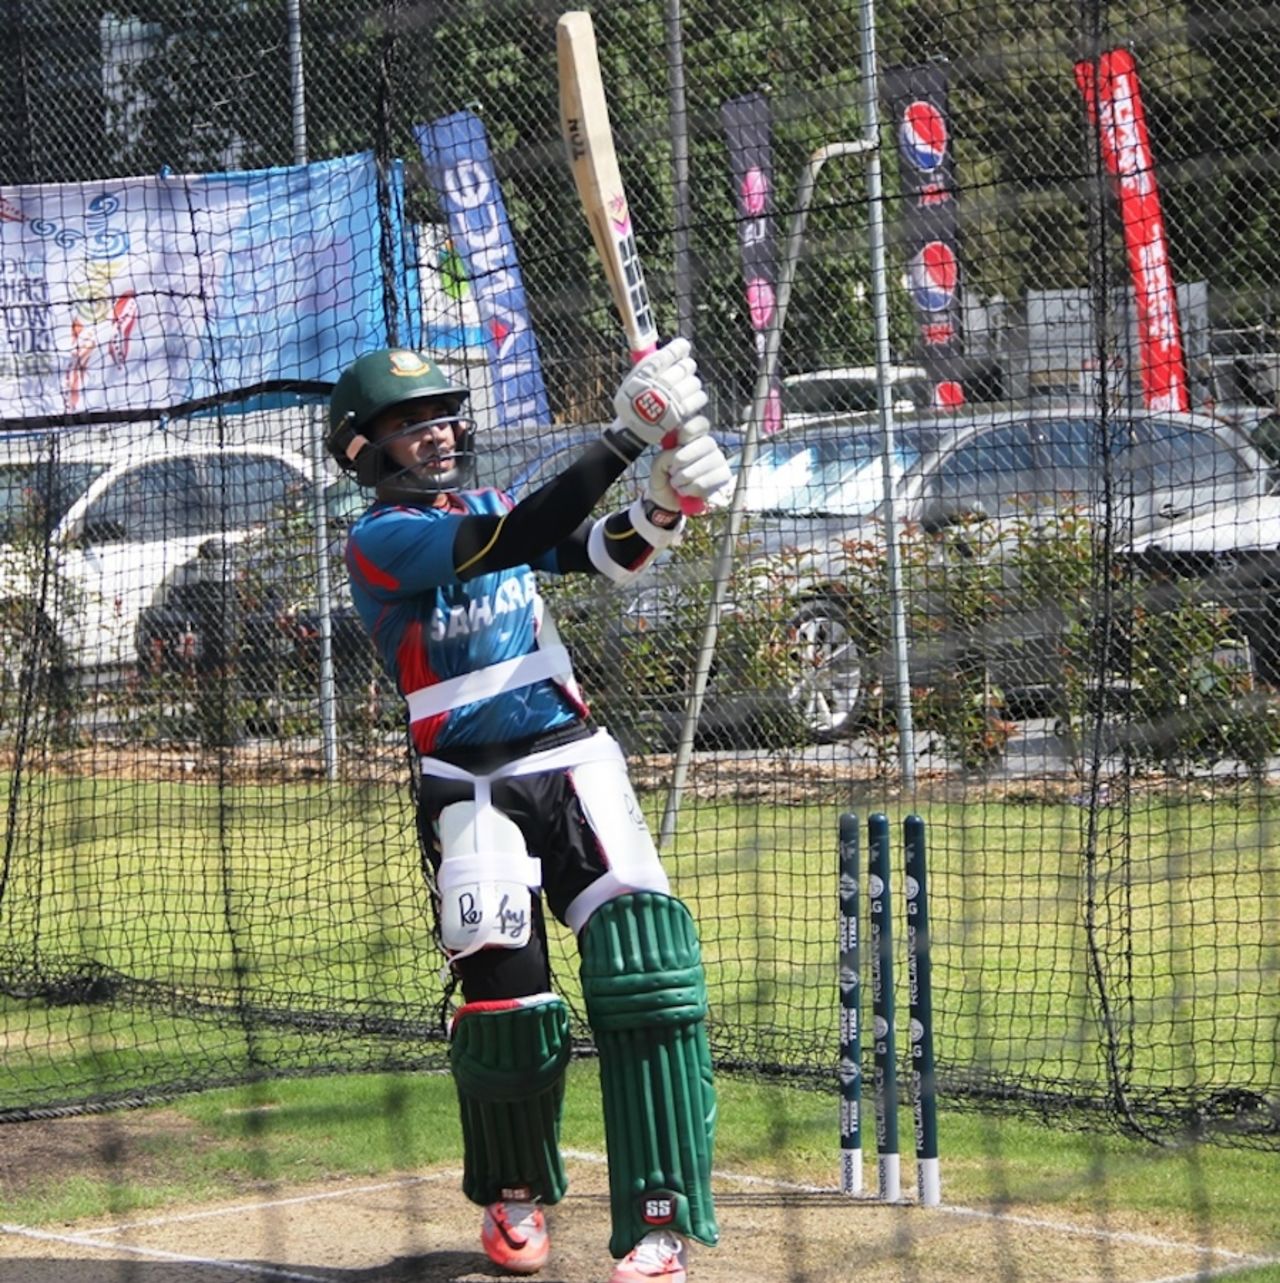 Mushfiqur Rahim batted the longest in the nets, World Cup 2015, Canberra, February 16, 2015